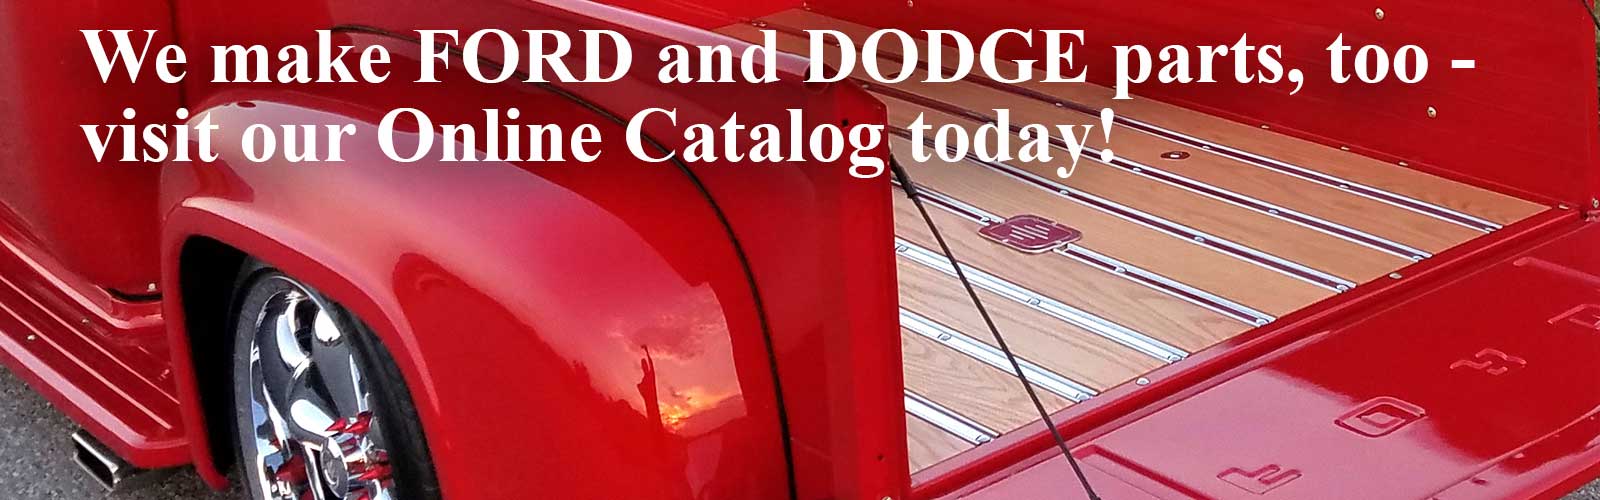 We make Dodge and Ford parts too!